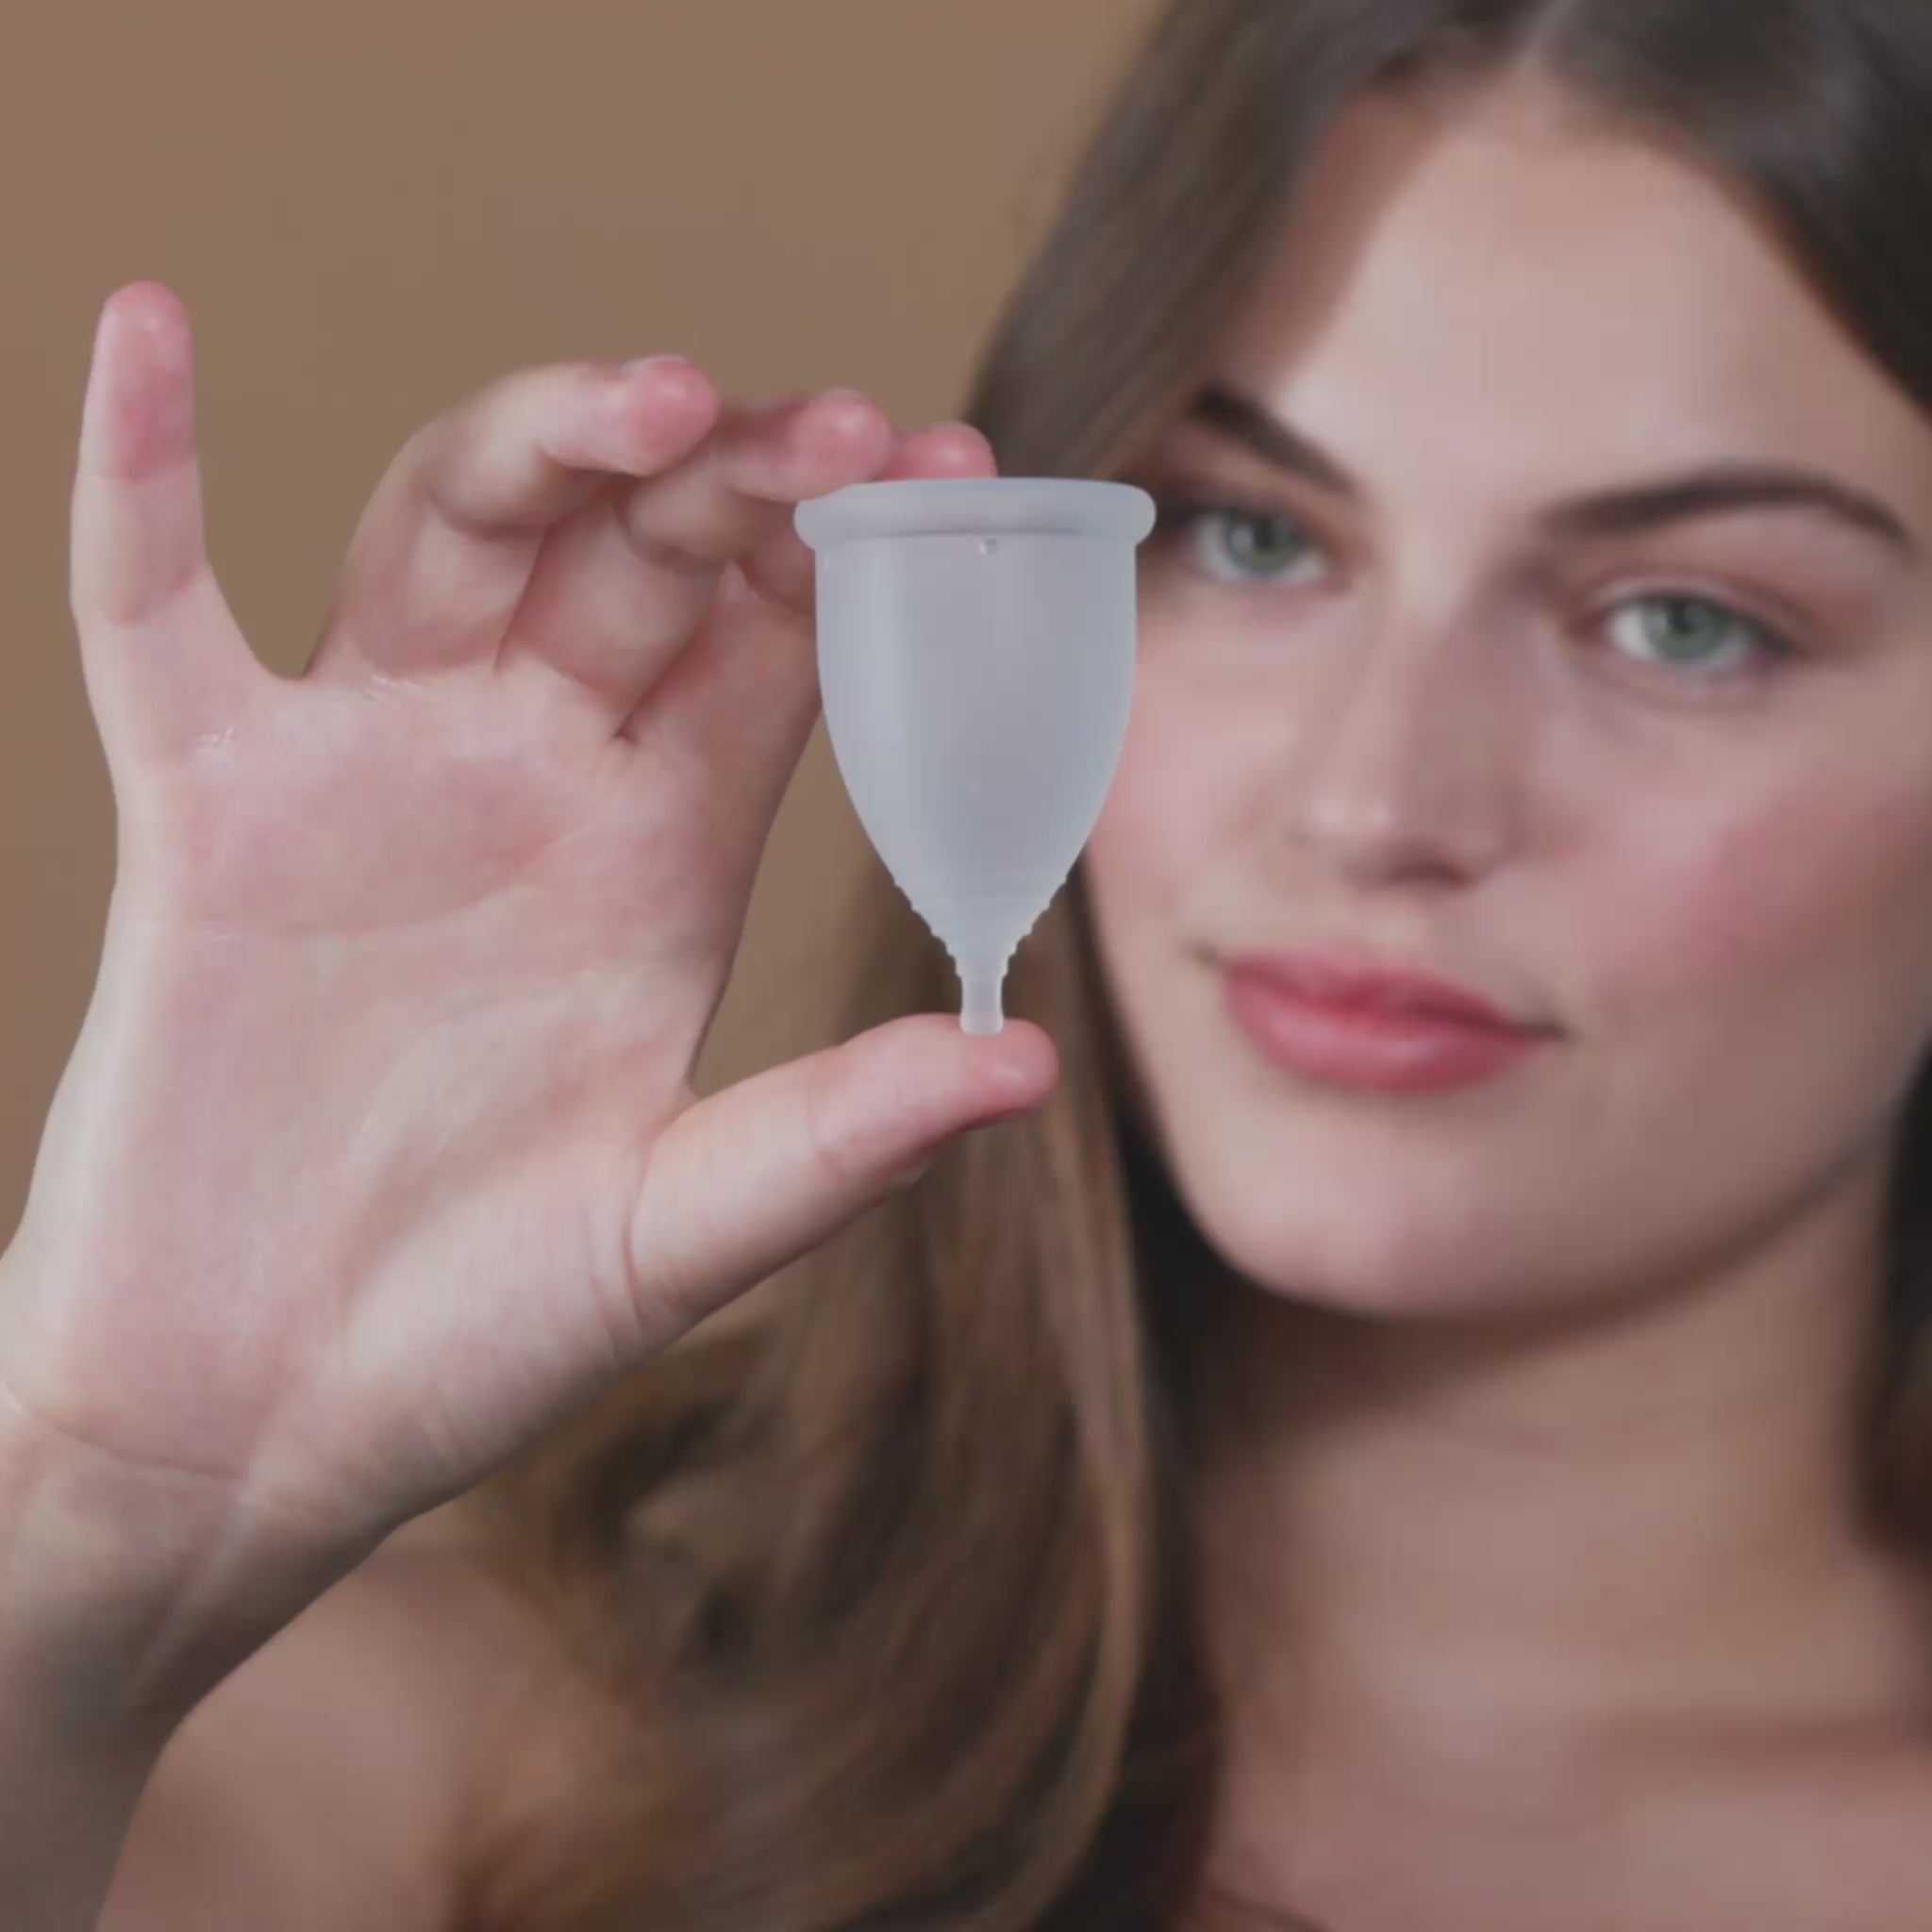 Remove Your Menstrual Cup Mess-Free